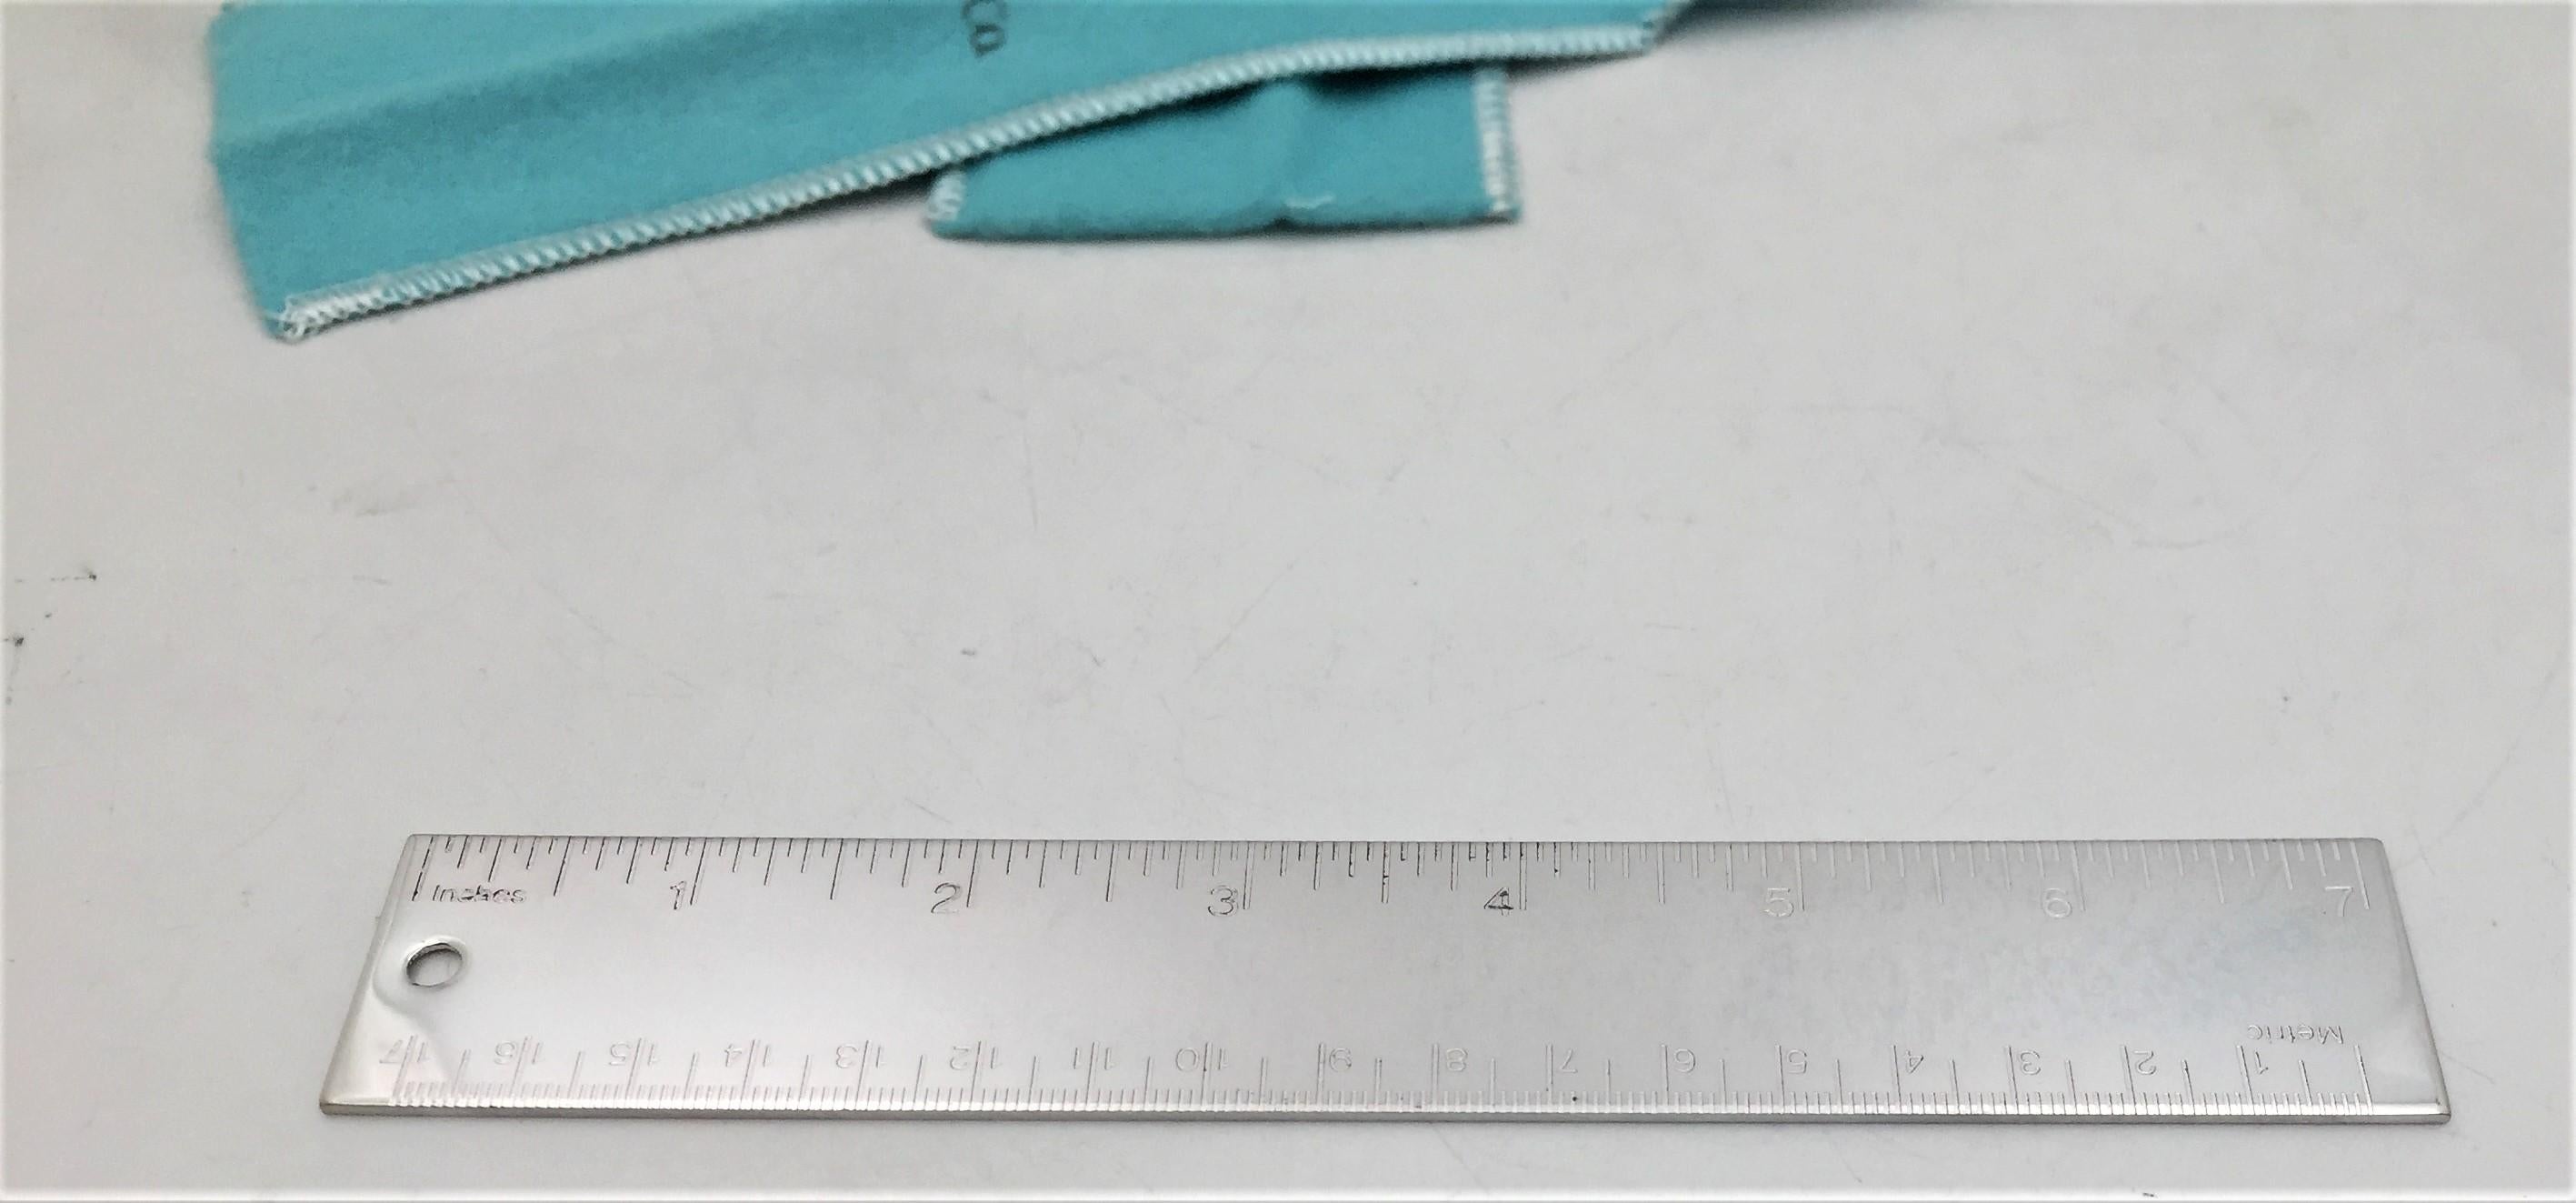 Set of 4 Tiffany & Co. silver plate metric rulers measuring 7 inches (17 centimeters) long. Comes in an authentic Tiffany & Co. branded aqua-colored felt pouch. Brand new condition. Great unisex gift for any holiday or occasion, birthday, or